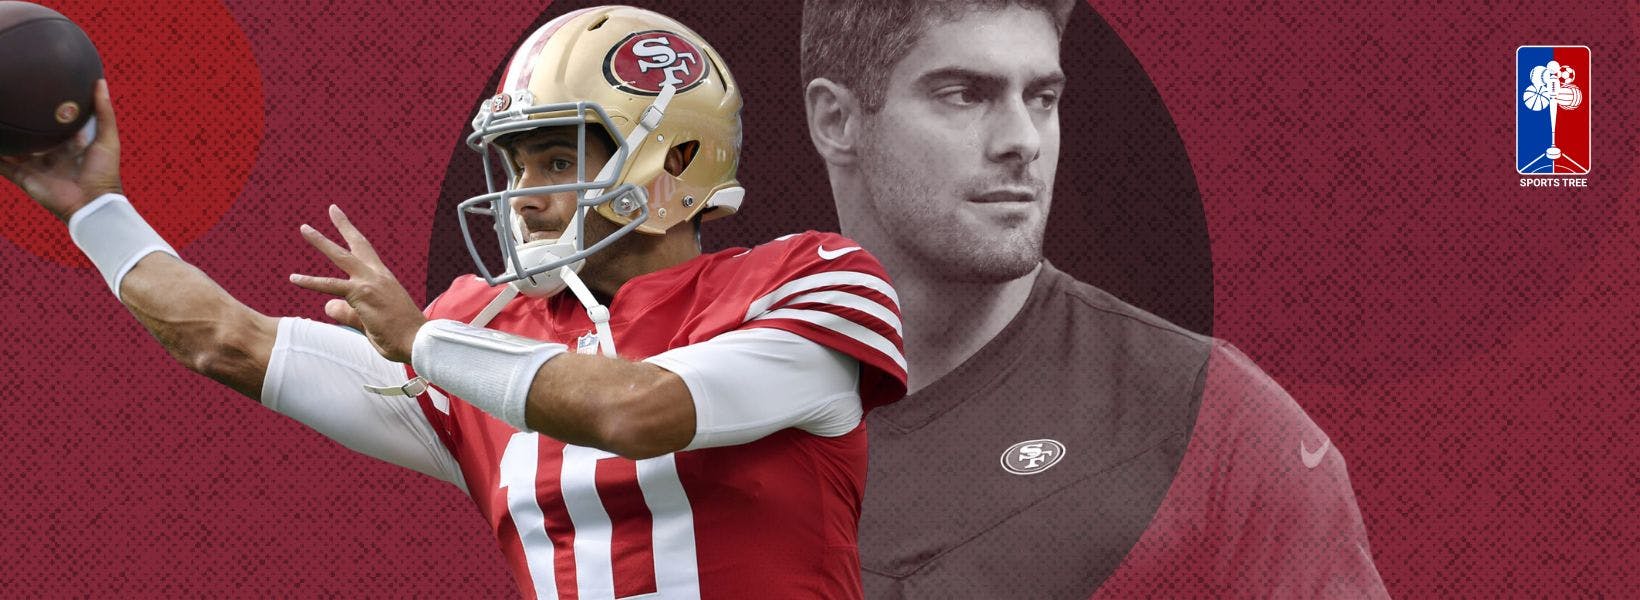 Raiders to sign Jimmy Garoppolo to a six-year contract